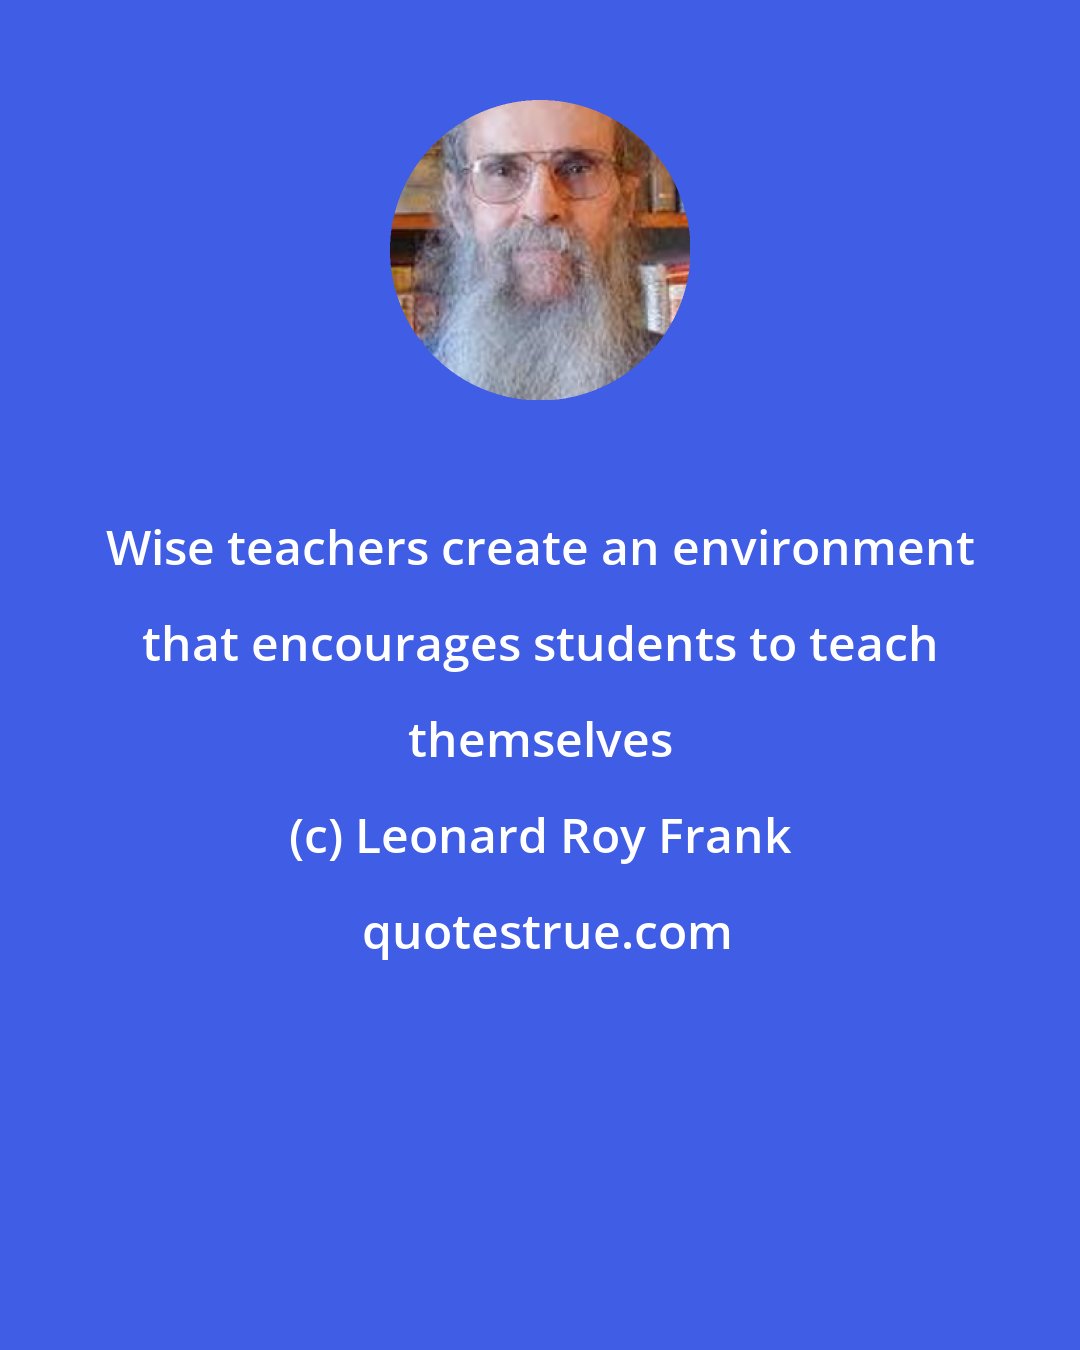 Leonard Roy Frank: Wise teachers create an environment that encourages students to teach themselves